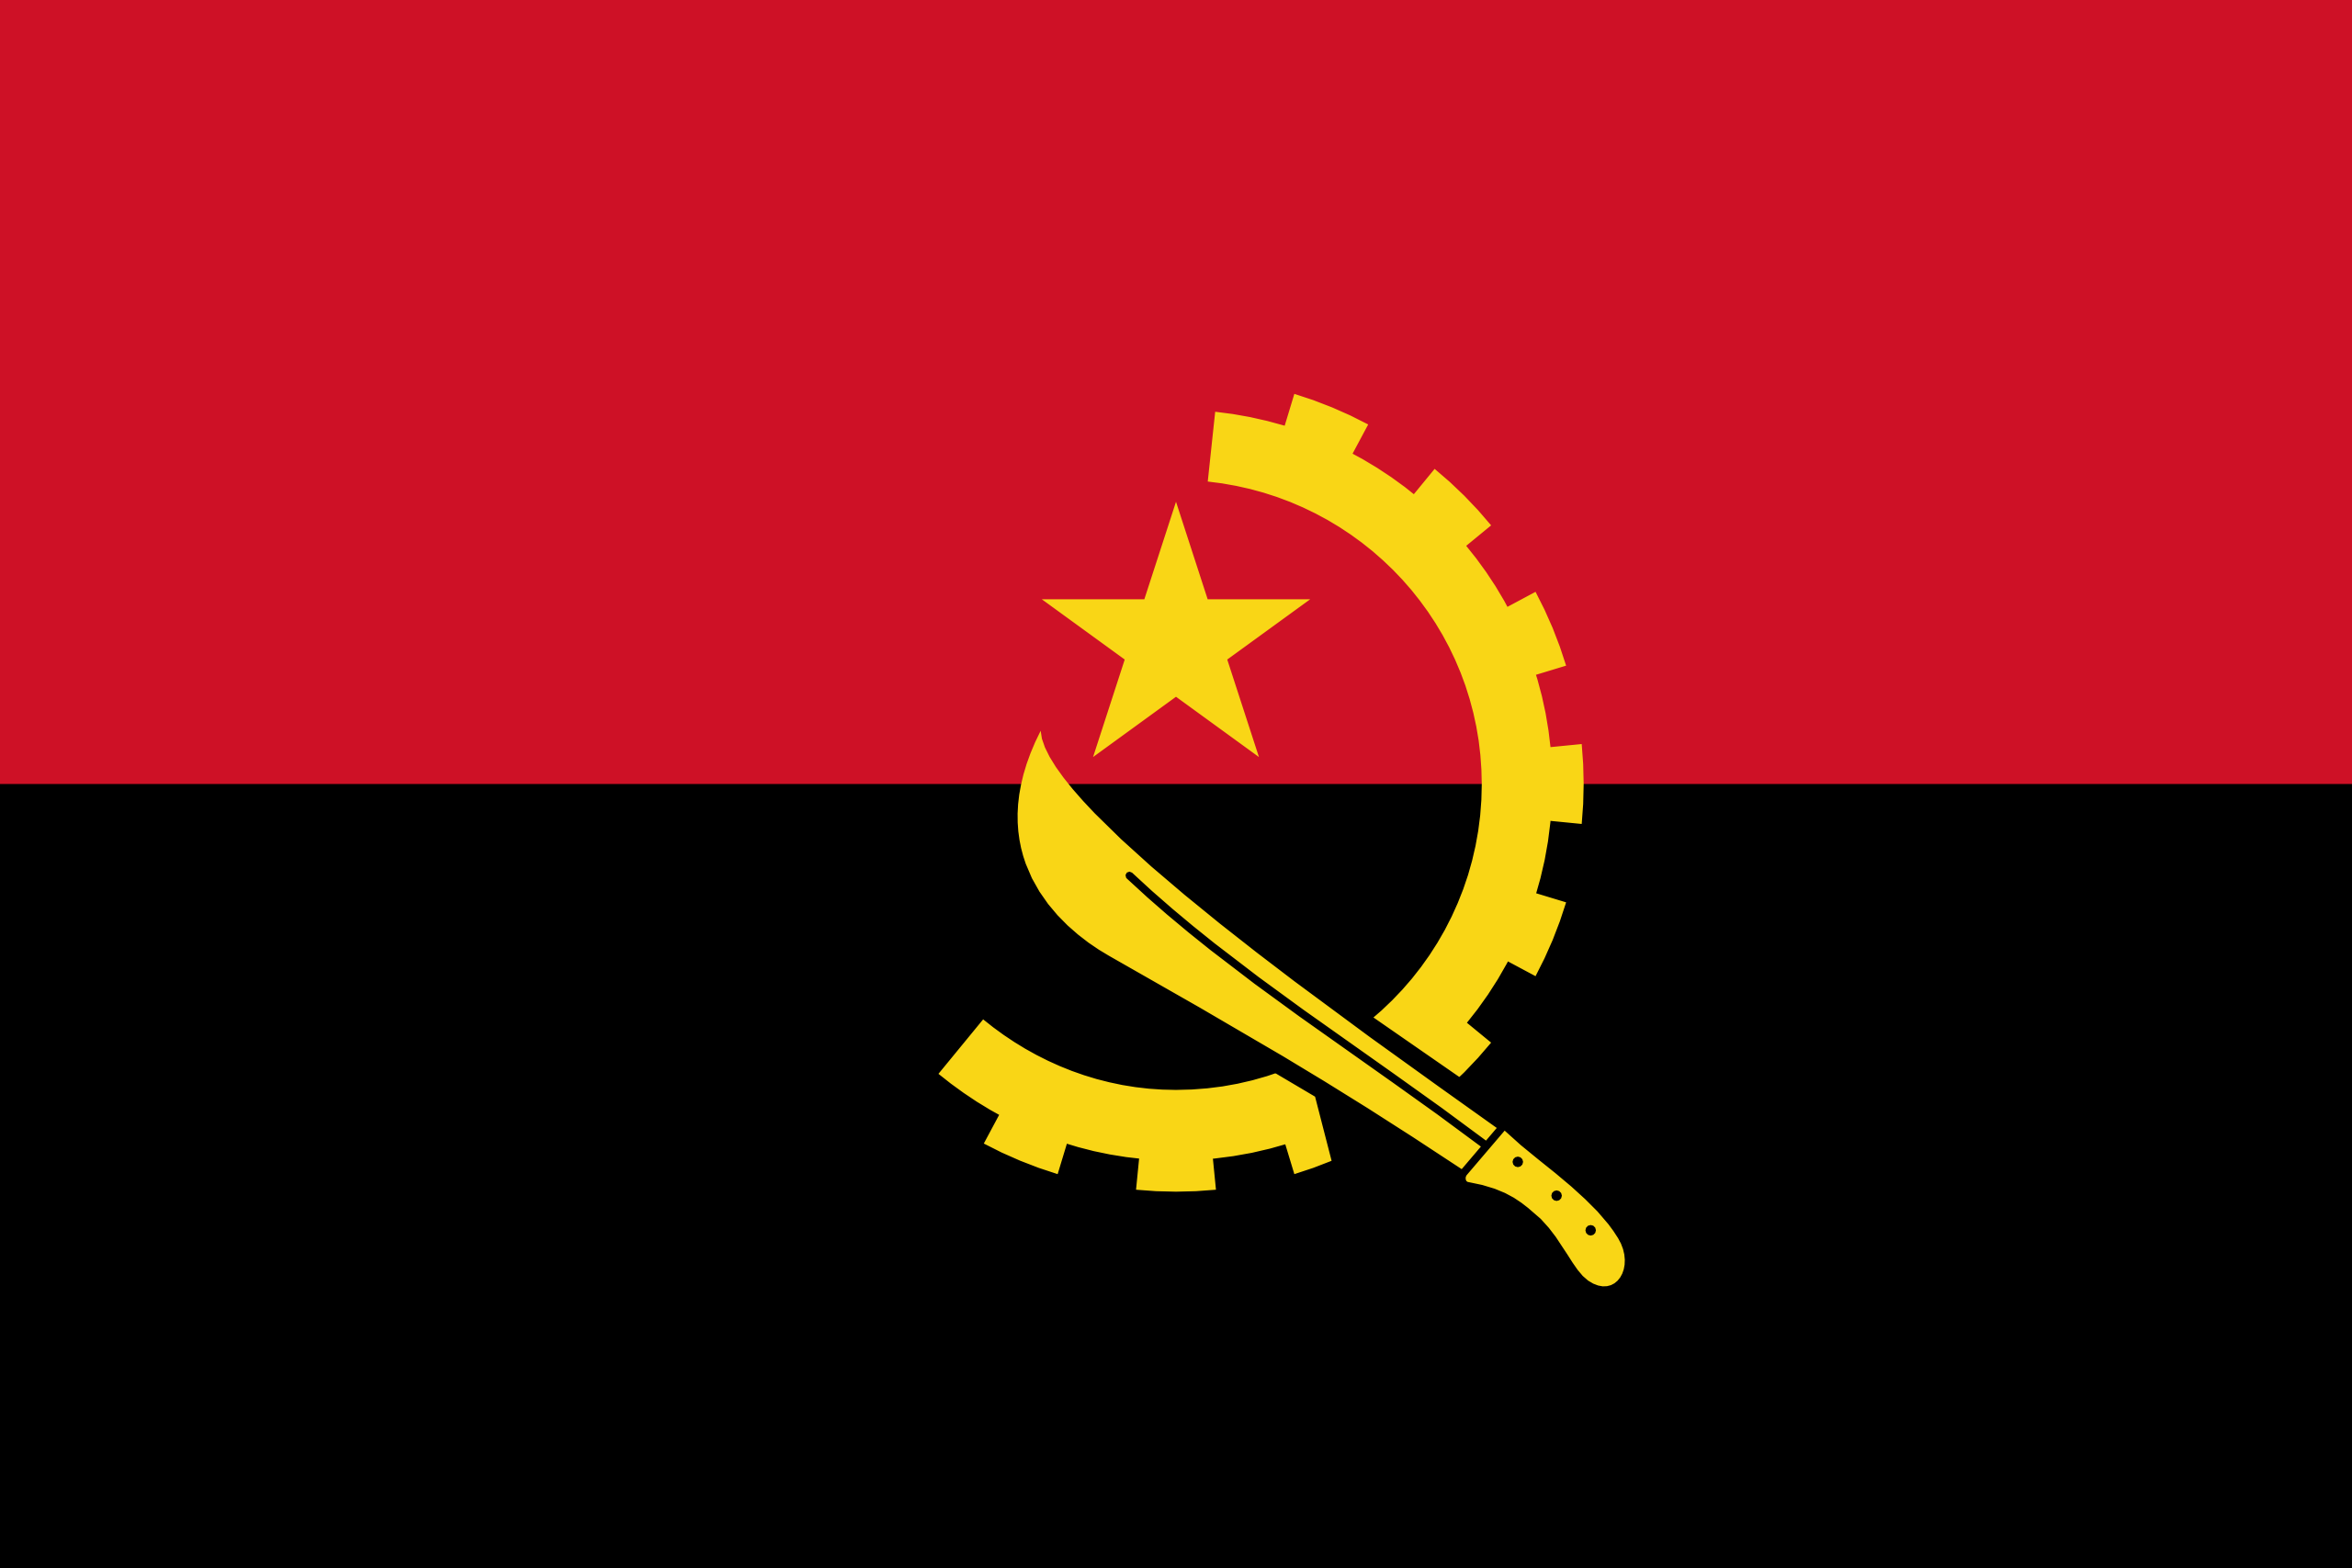 Angola secures $2 bln in infrastructure financing from China